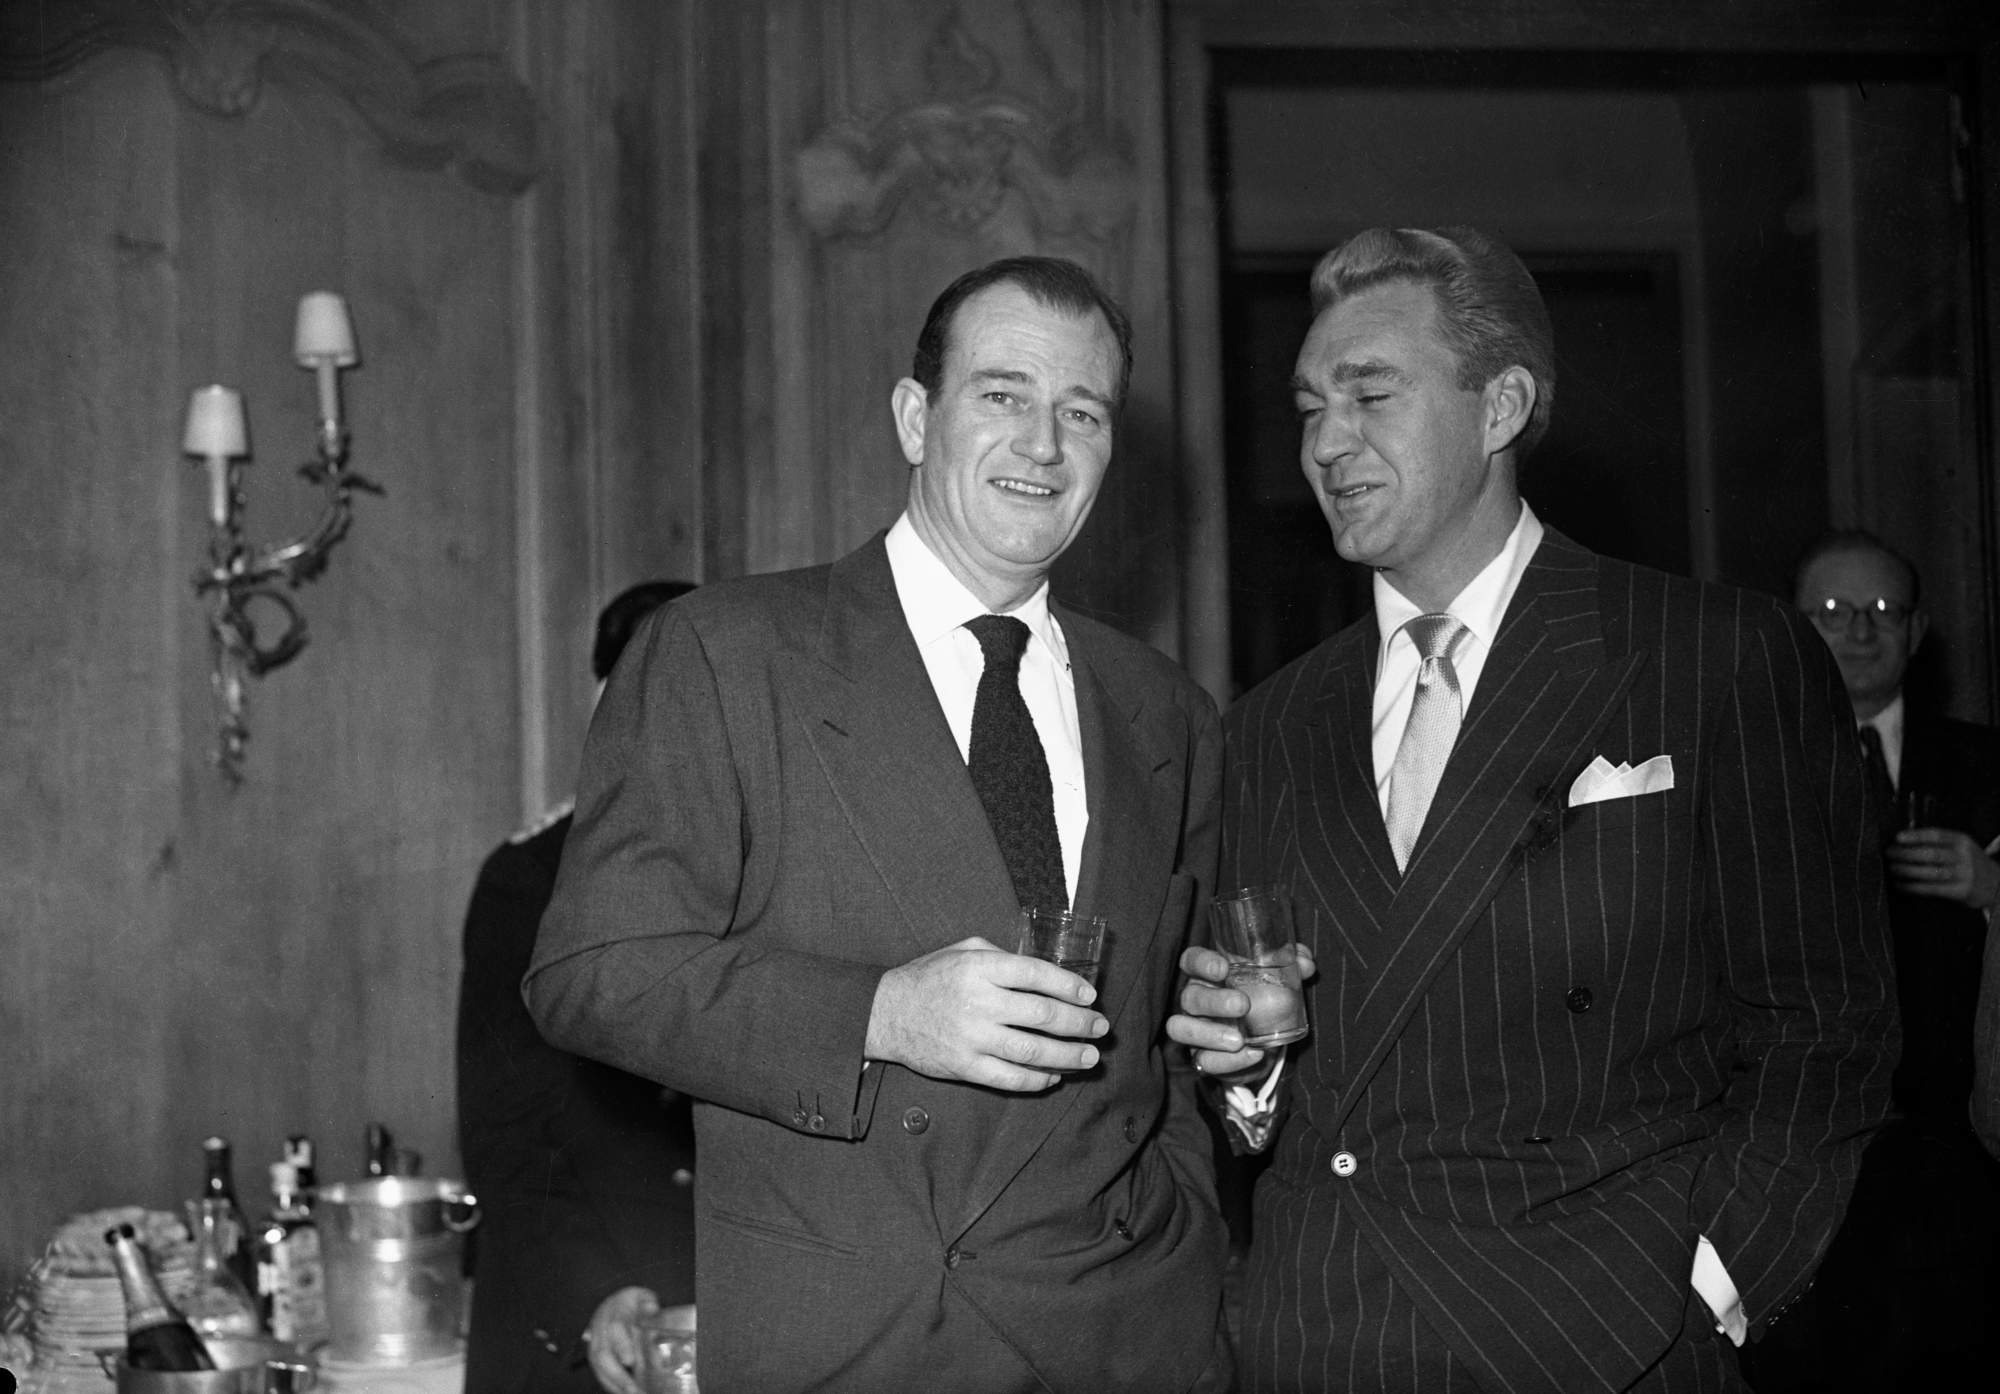 John Wayne having a drink with Forrest Tucker in a black-and-white picture. They're wearing suit and ties.